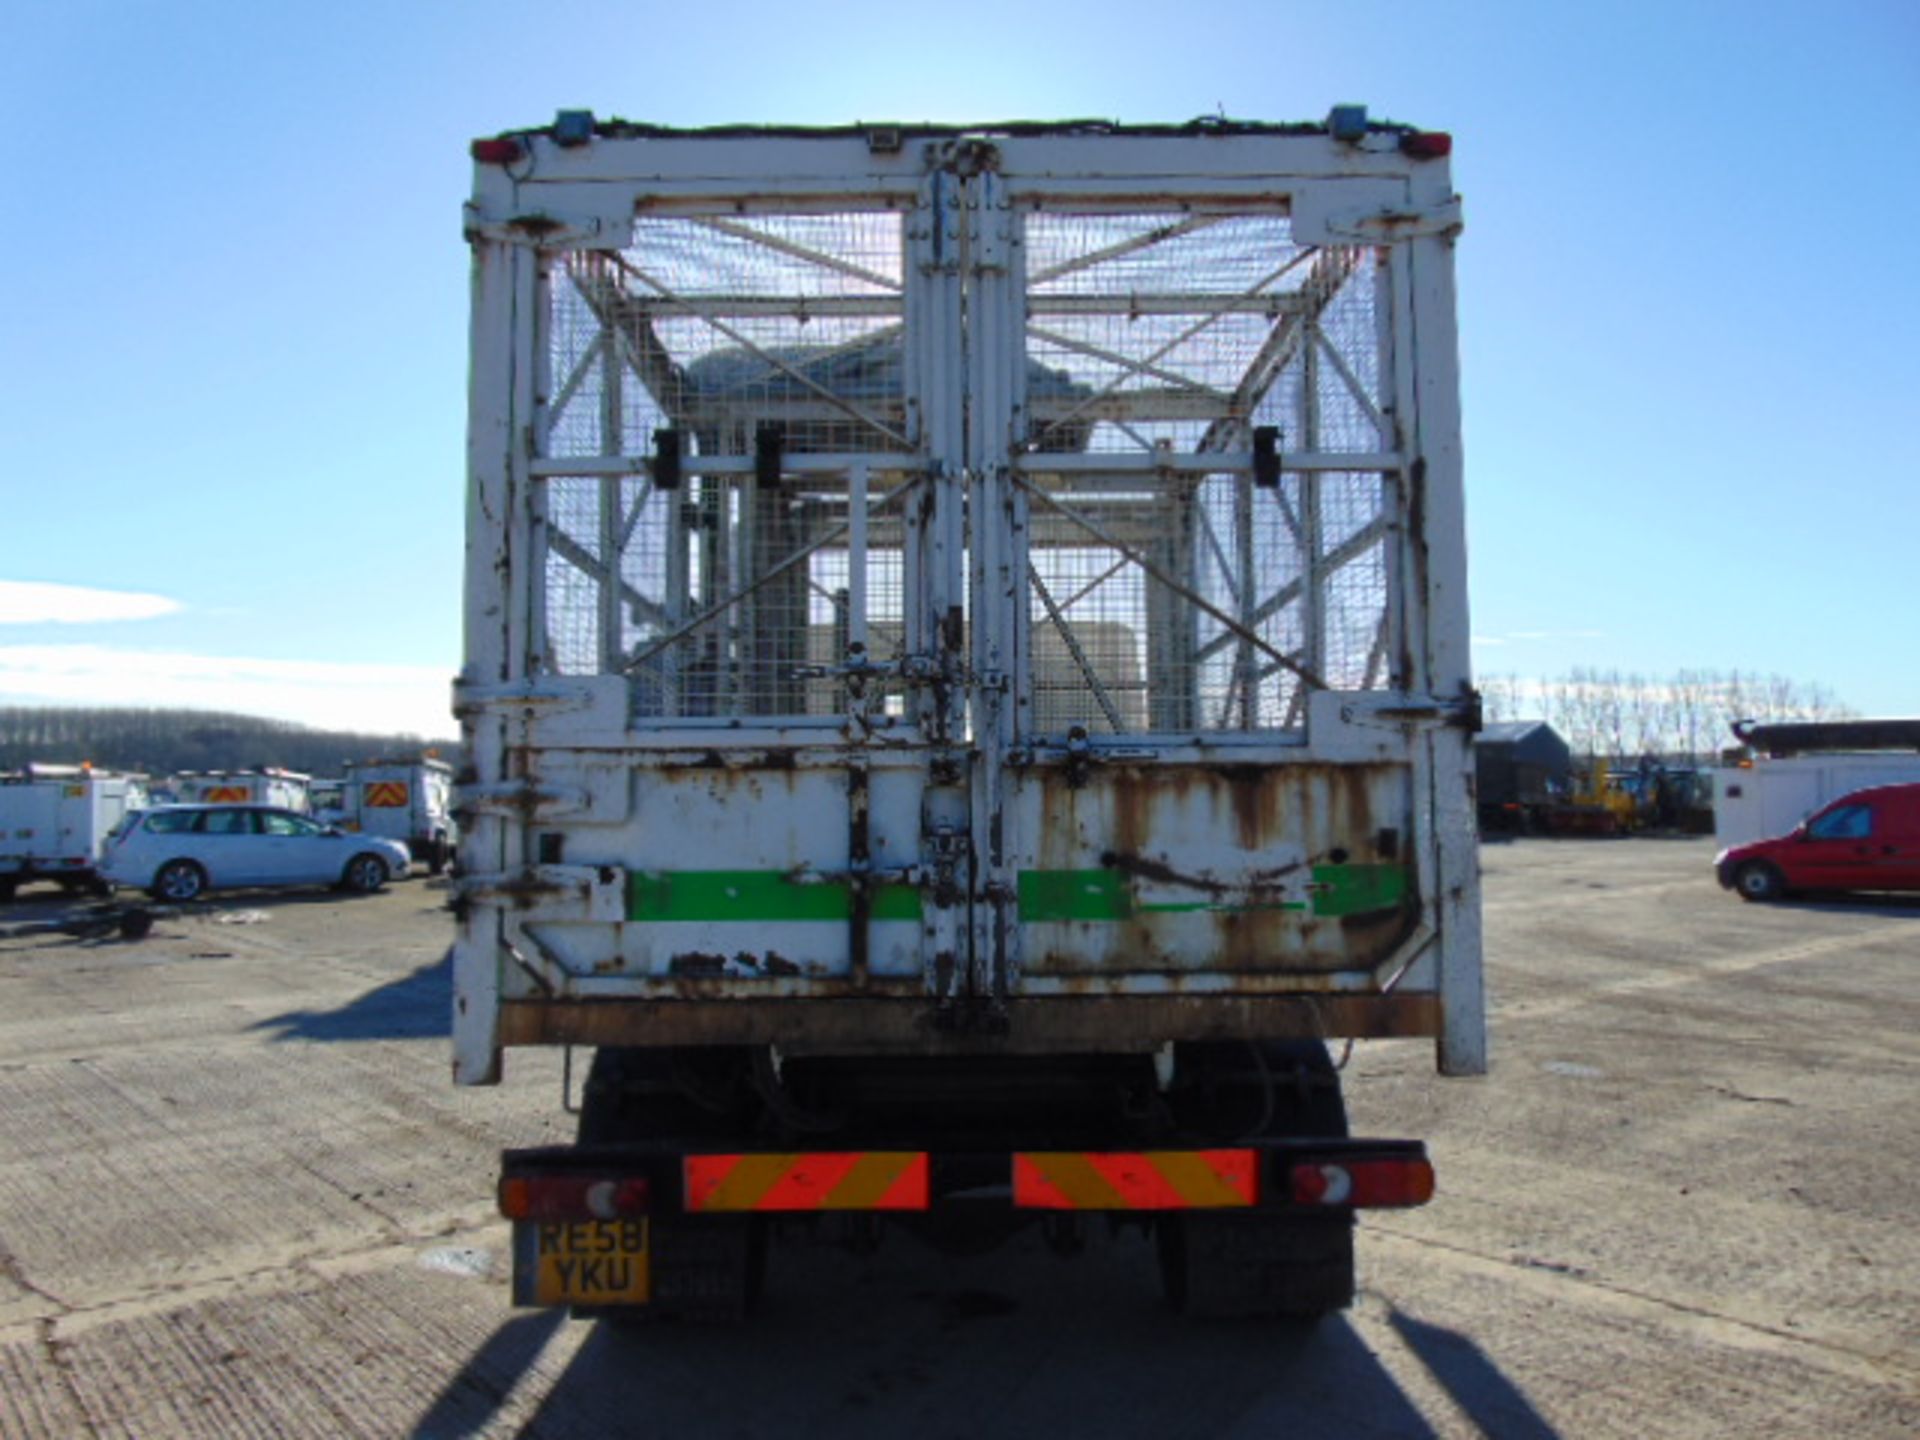 2008 DAF LF 45.140 C/W Refuse Cage, Rear Tipping Body and Side Bin Lift - Image 7 of 26